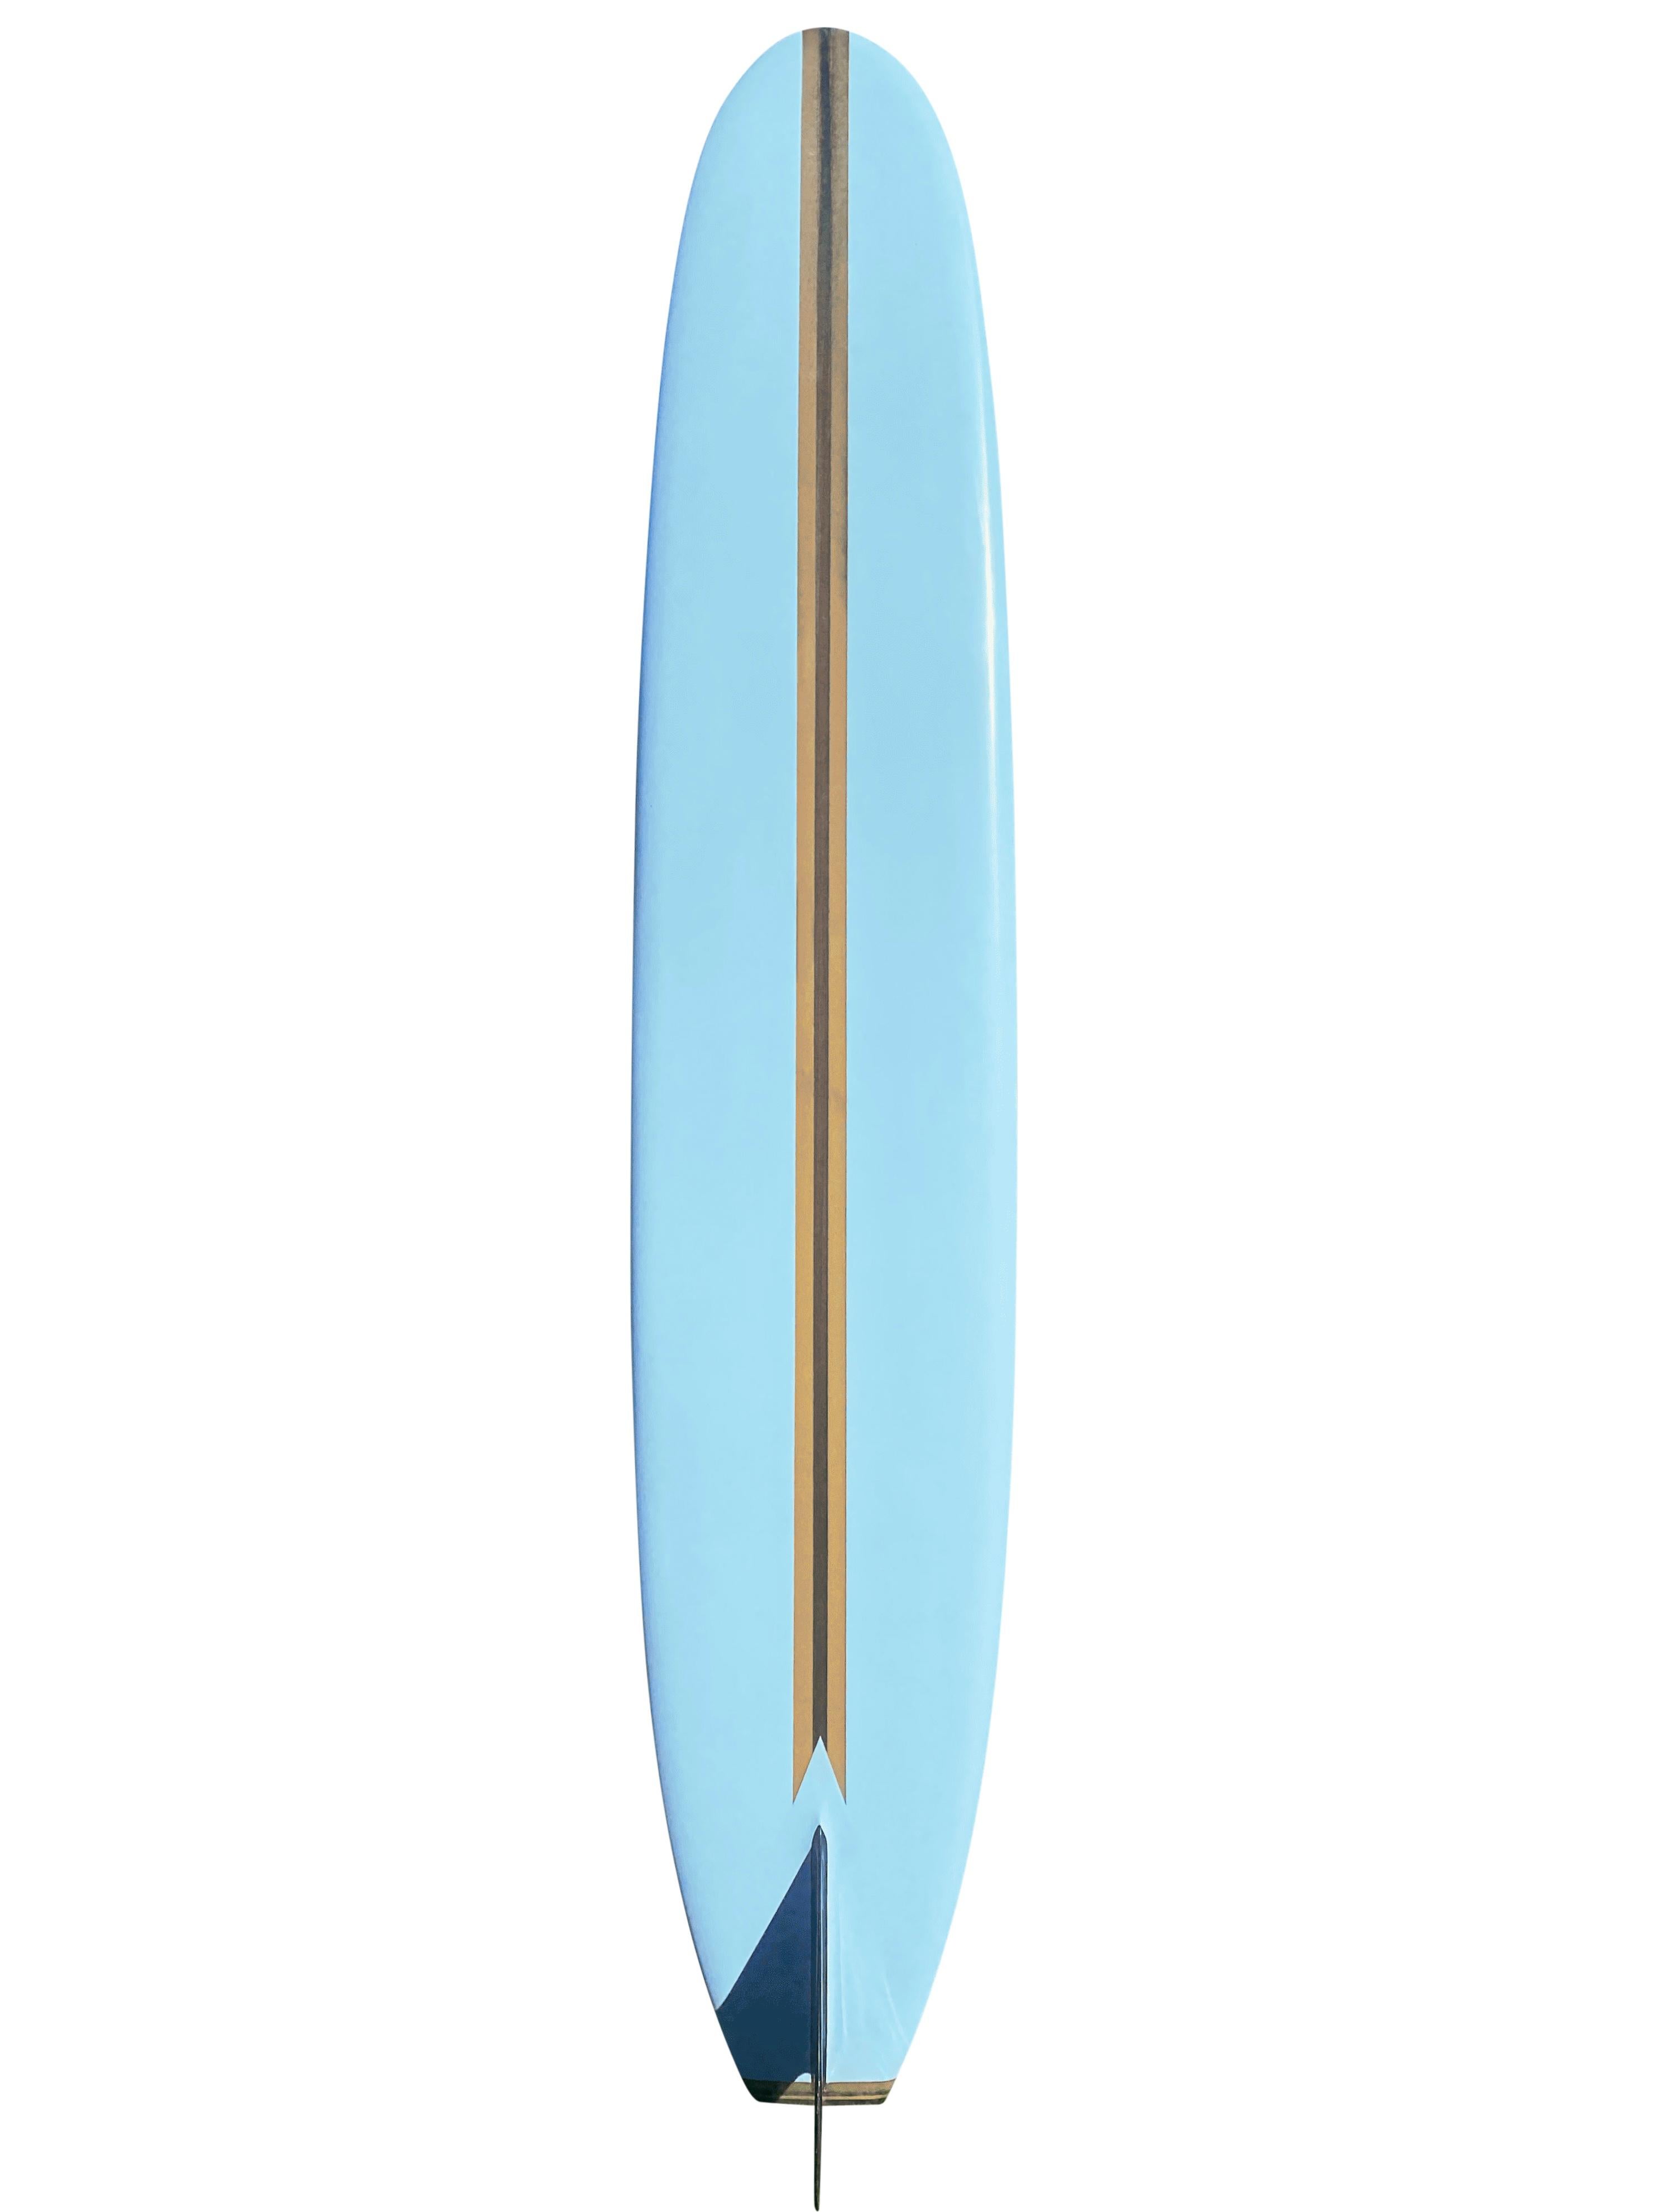 1965 Vintage Greg Noll custom longboard. Features gorgeous pastel blue color scheme with Greg Noll mid 1960s atomic logo variation. Single redwood stringer with wooden tail block and black single fin. A beautiful example of a 1960s custom longboard